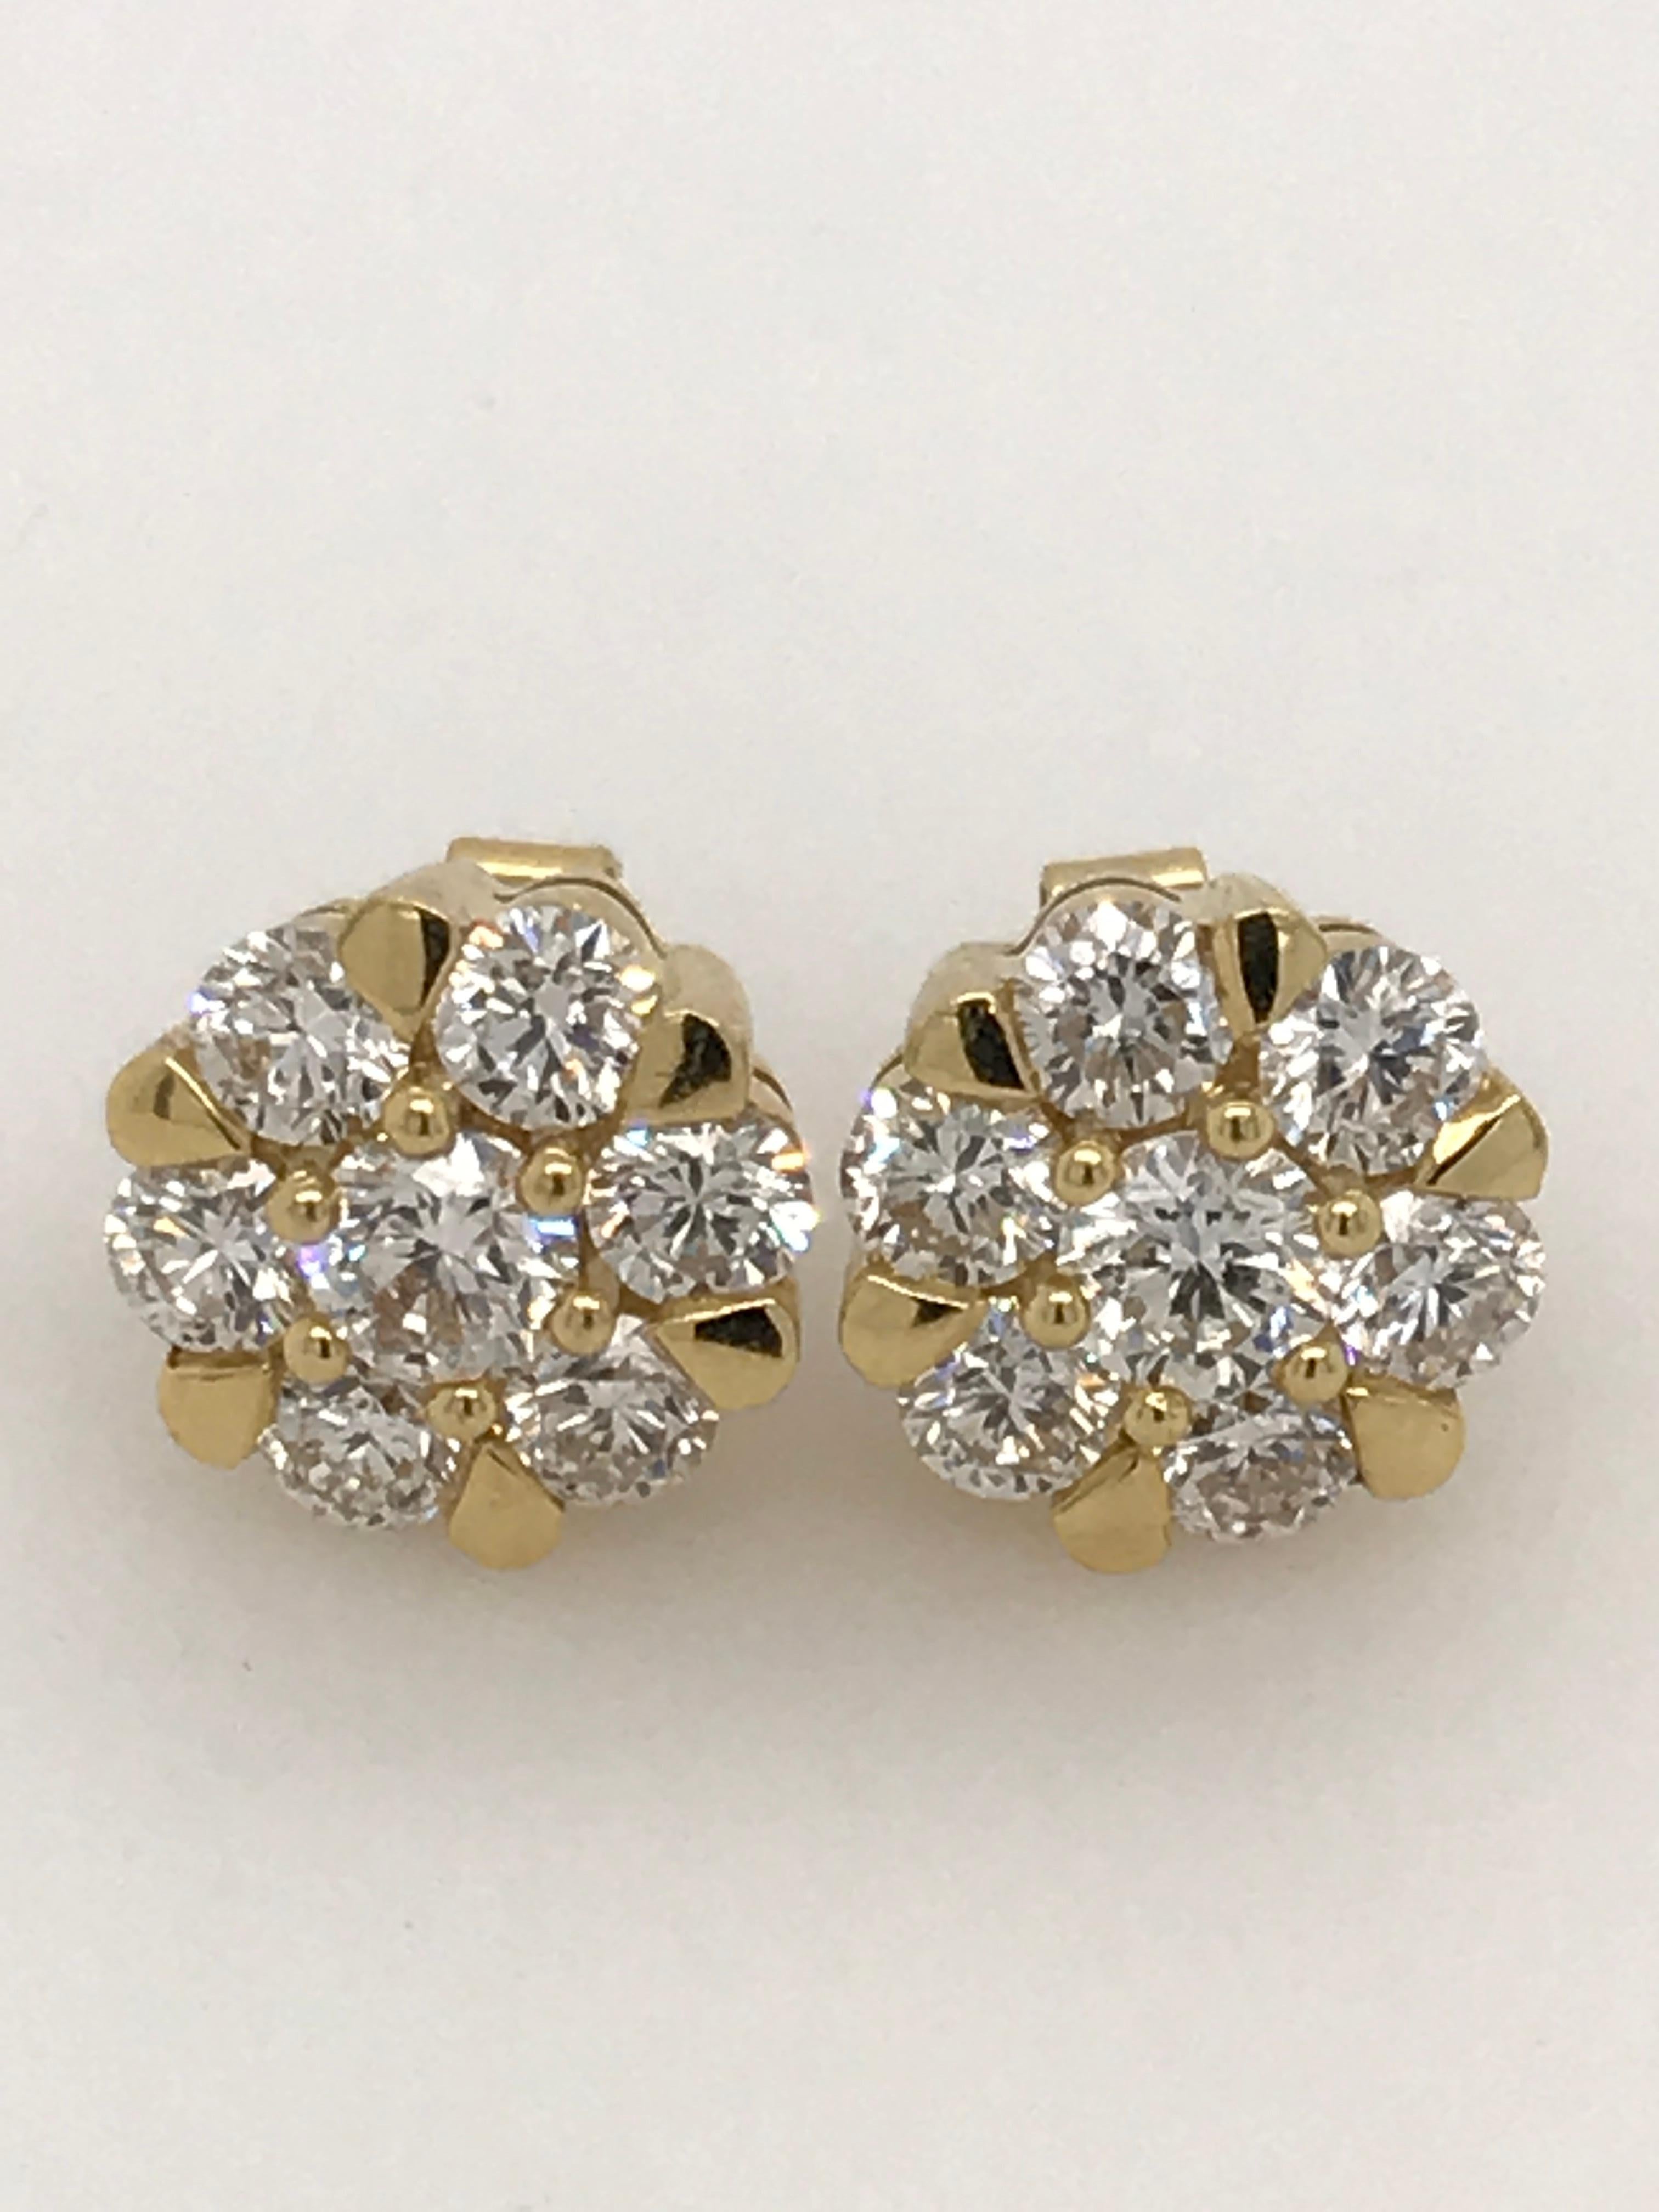 Diamond earrings with 2.09ct HSI brilliant cut diamonds set in 18ct yellow gold. The earrings are post and butterfly. The post extends from the back centre and they measure approximately 11mm across.
14 brilliant cut diamonds totalling 2.09ct
There